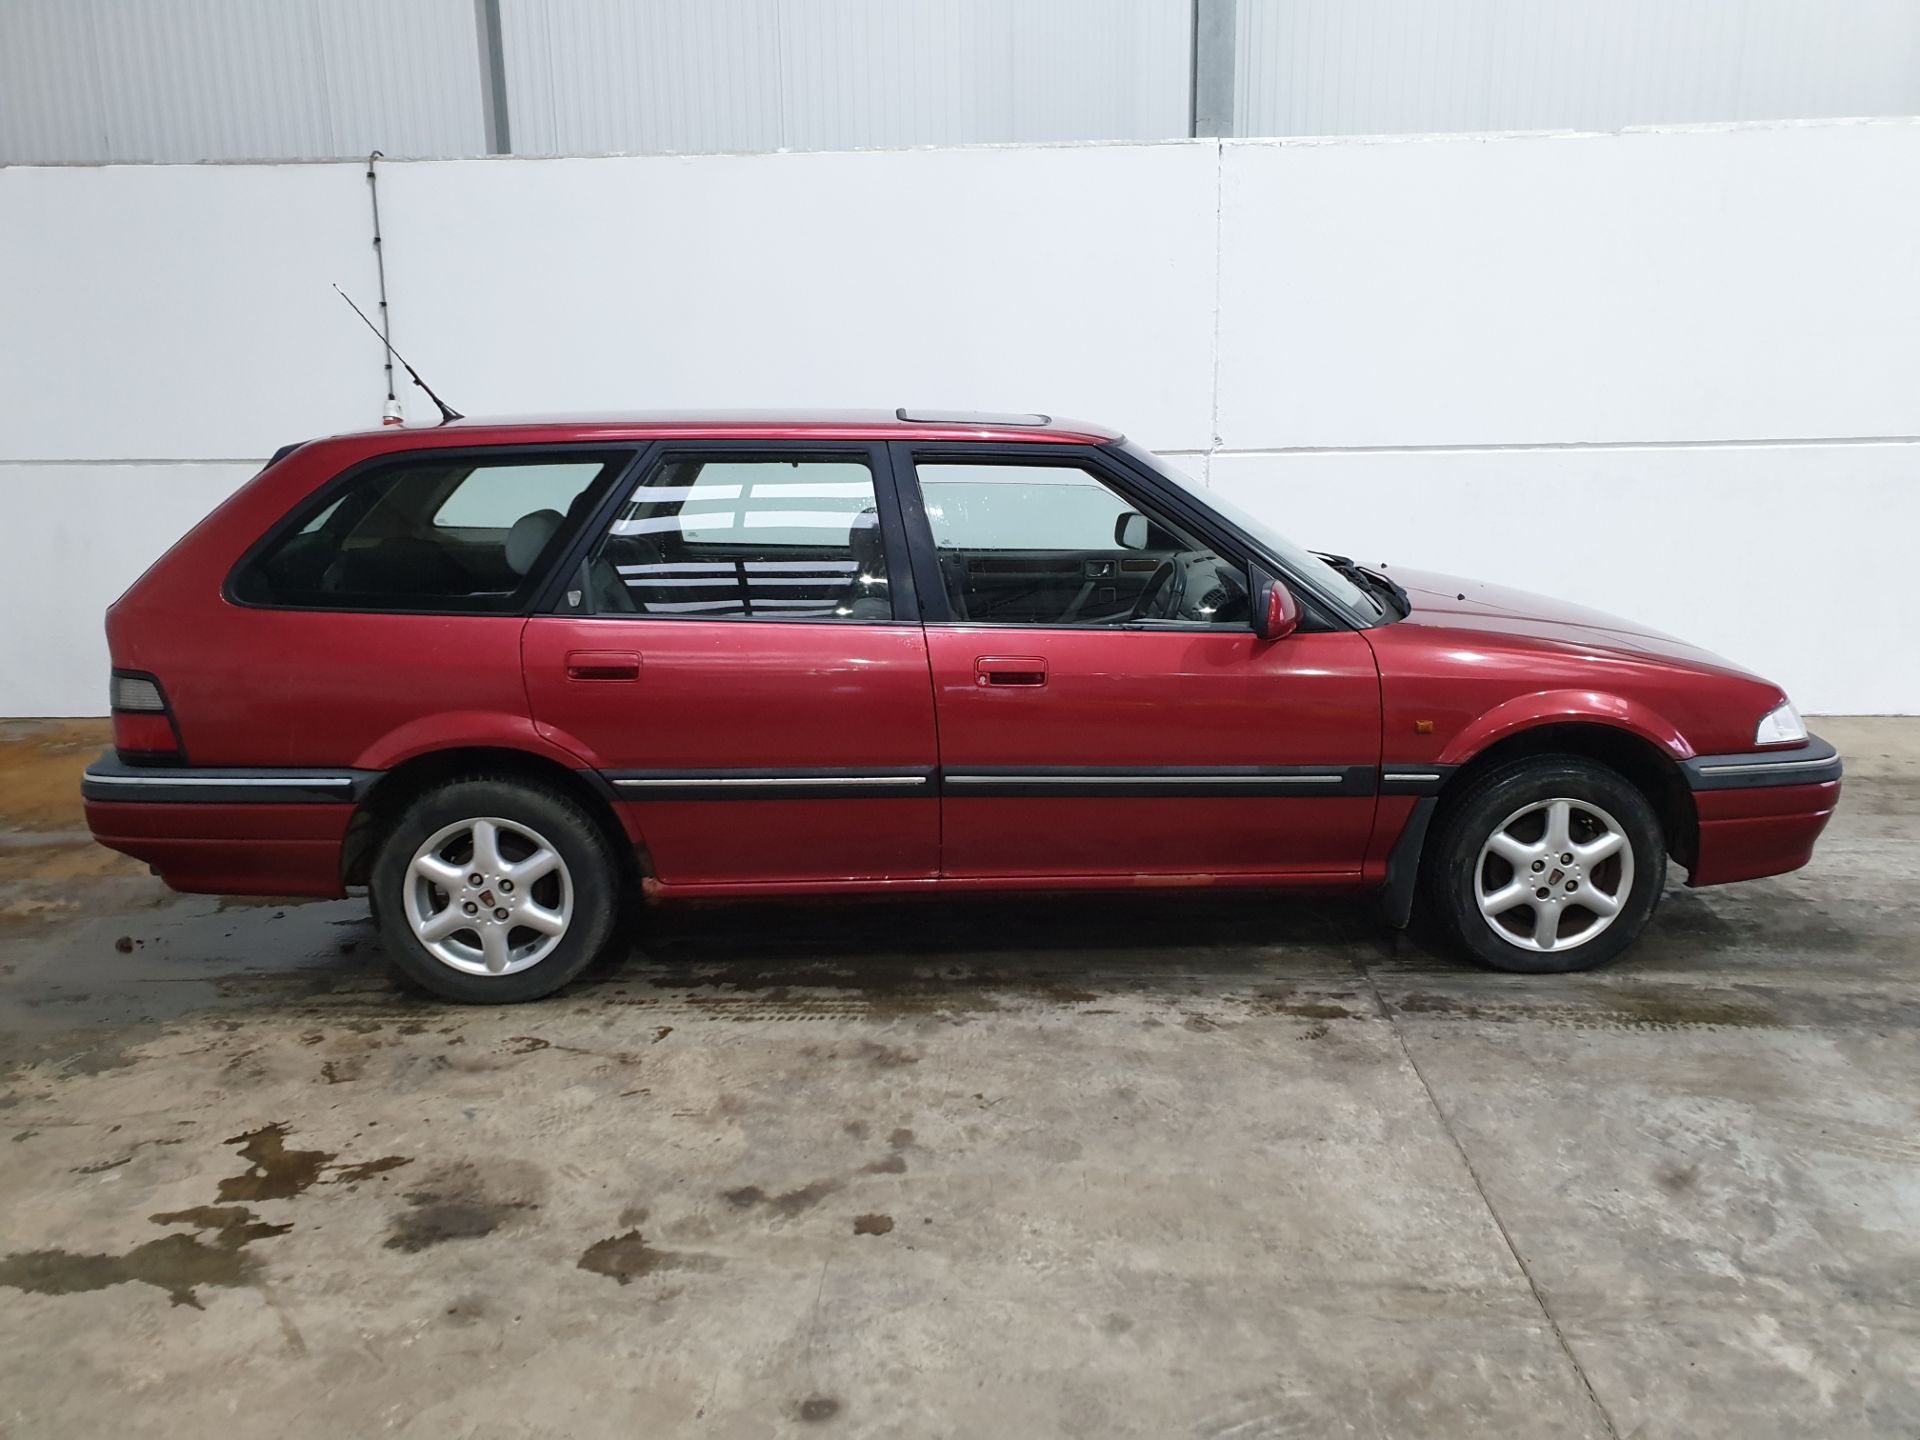 Rover 416 Touring - Image 2 of 8